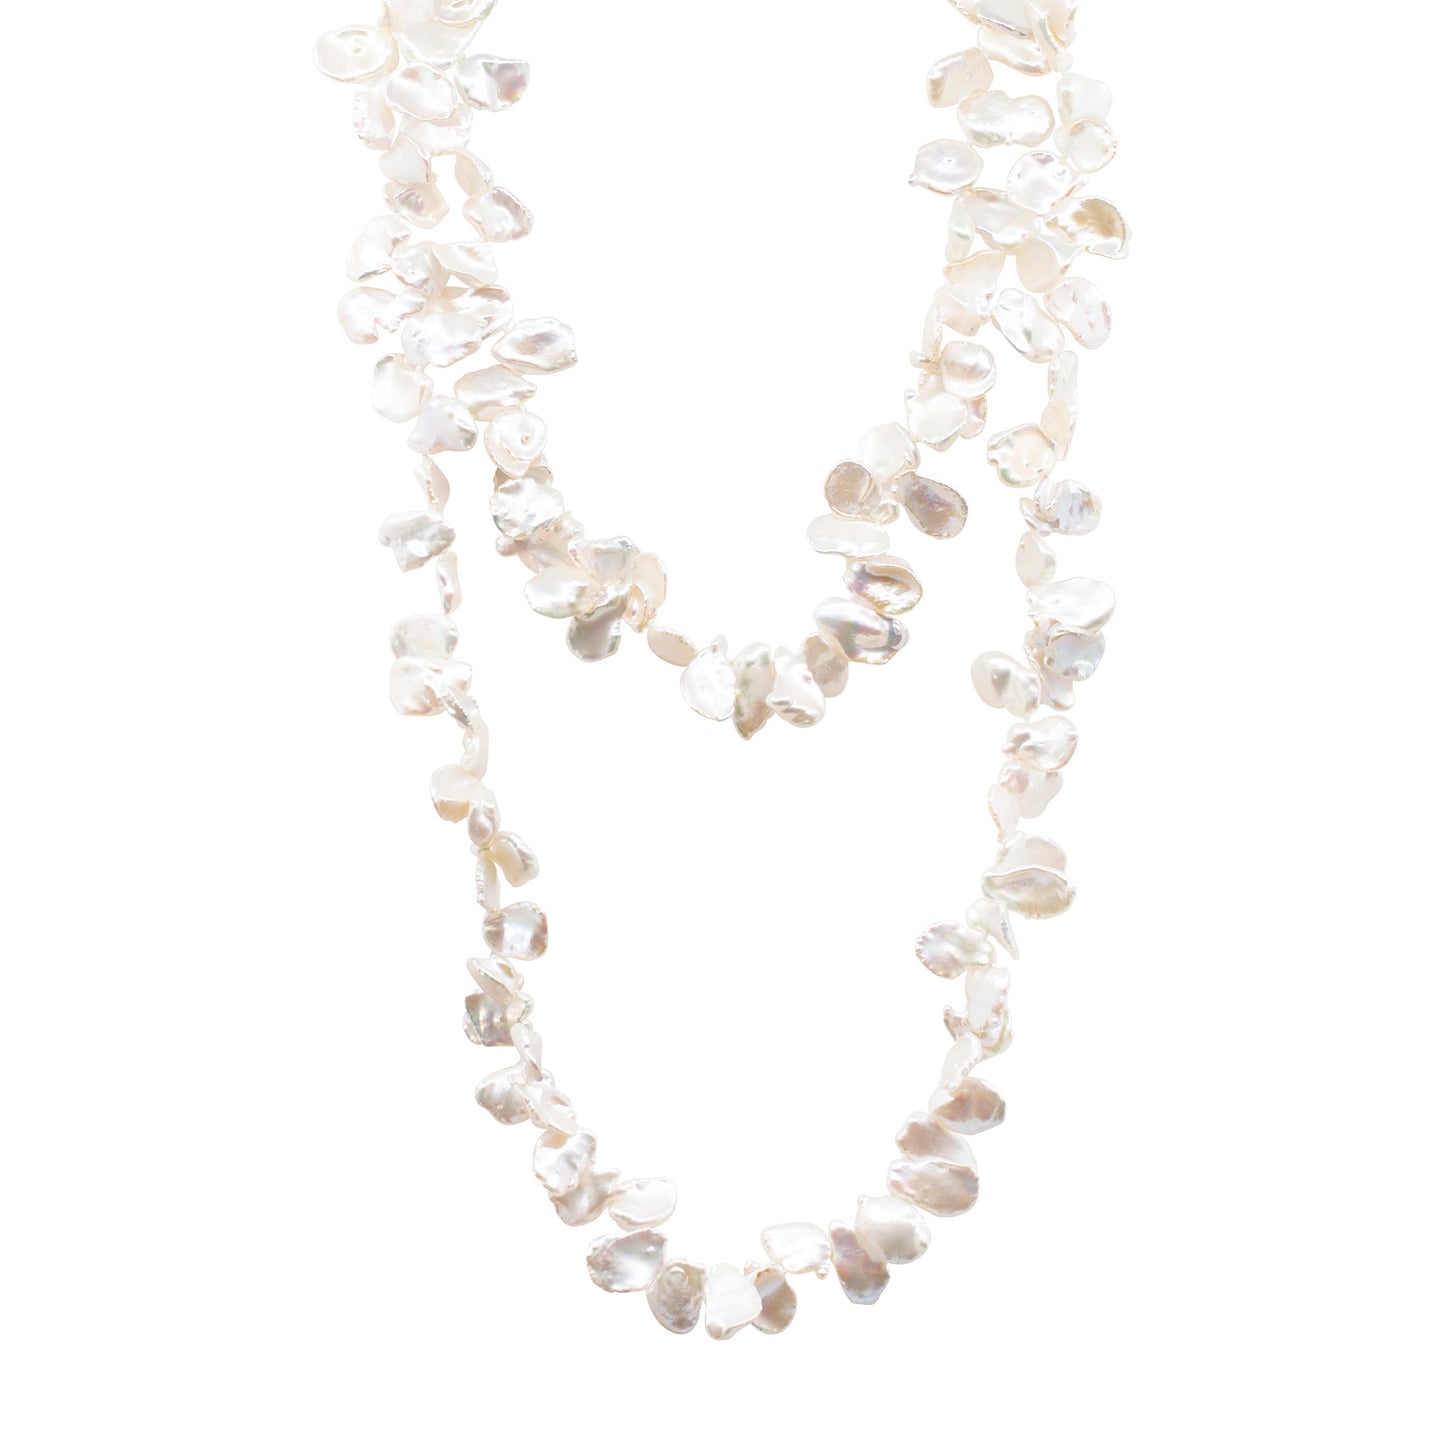 Anna - Keshi Pearl Necklace (White pearls, layered)